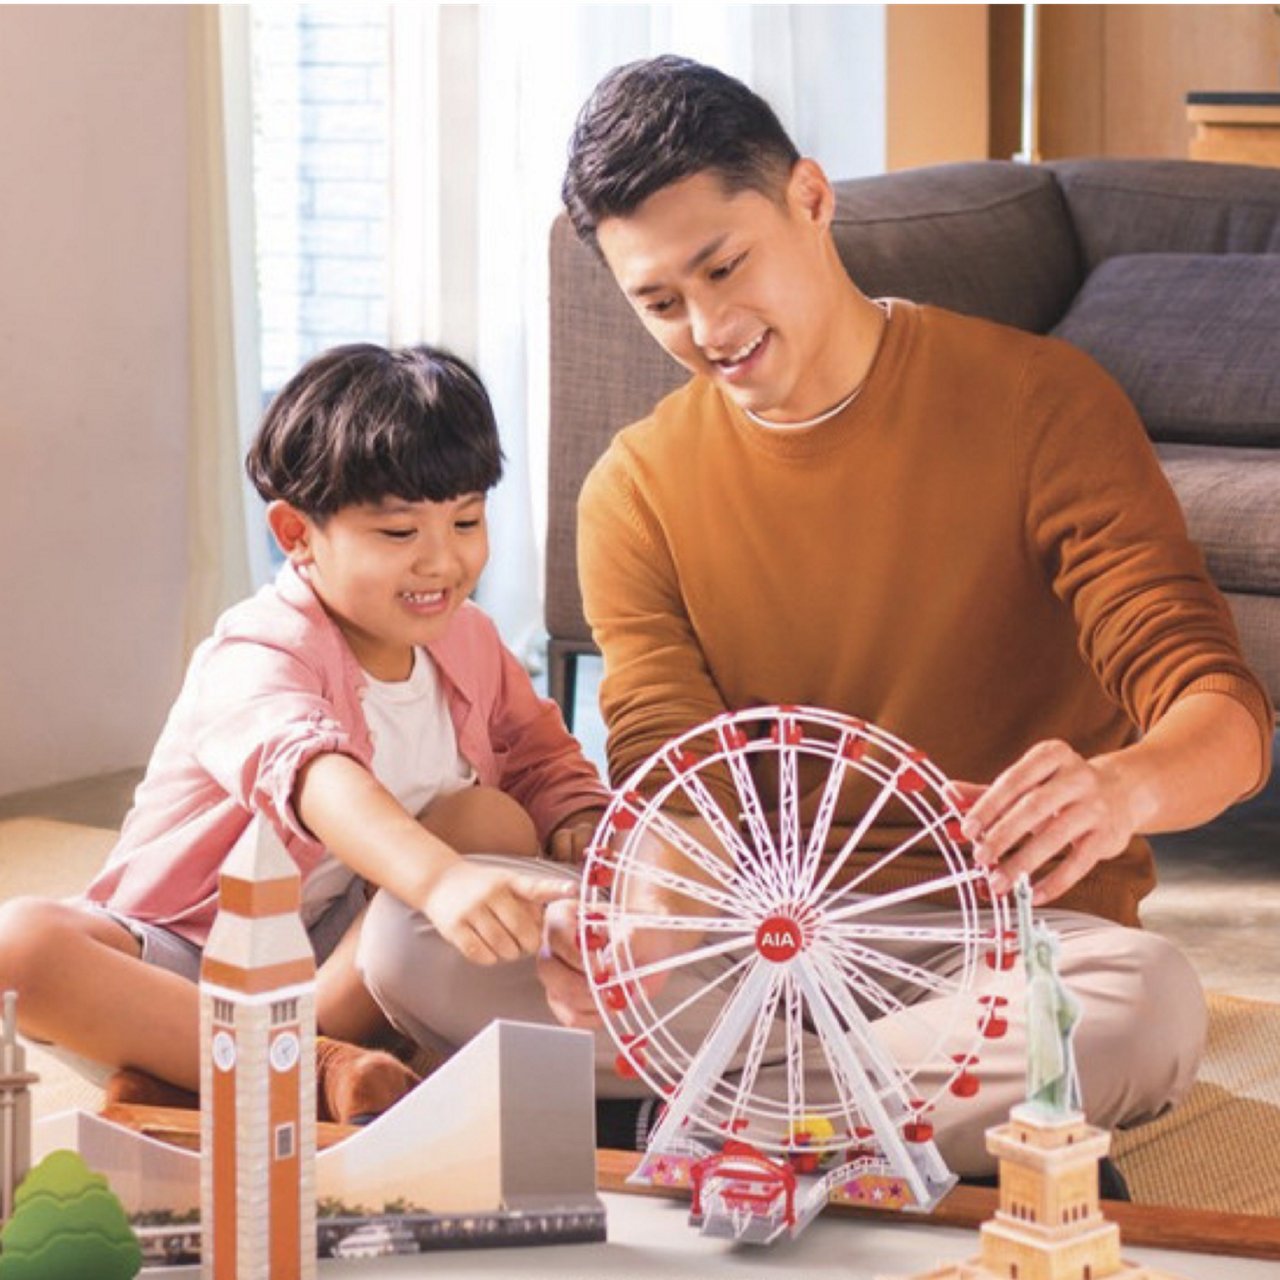 a man along with a child are playing with toys